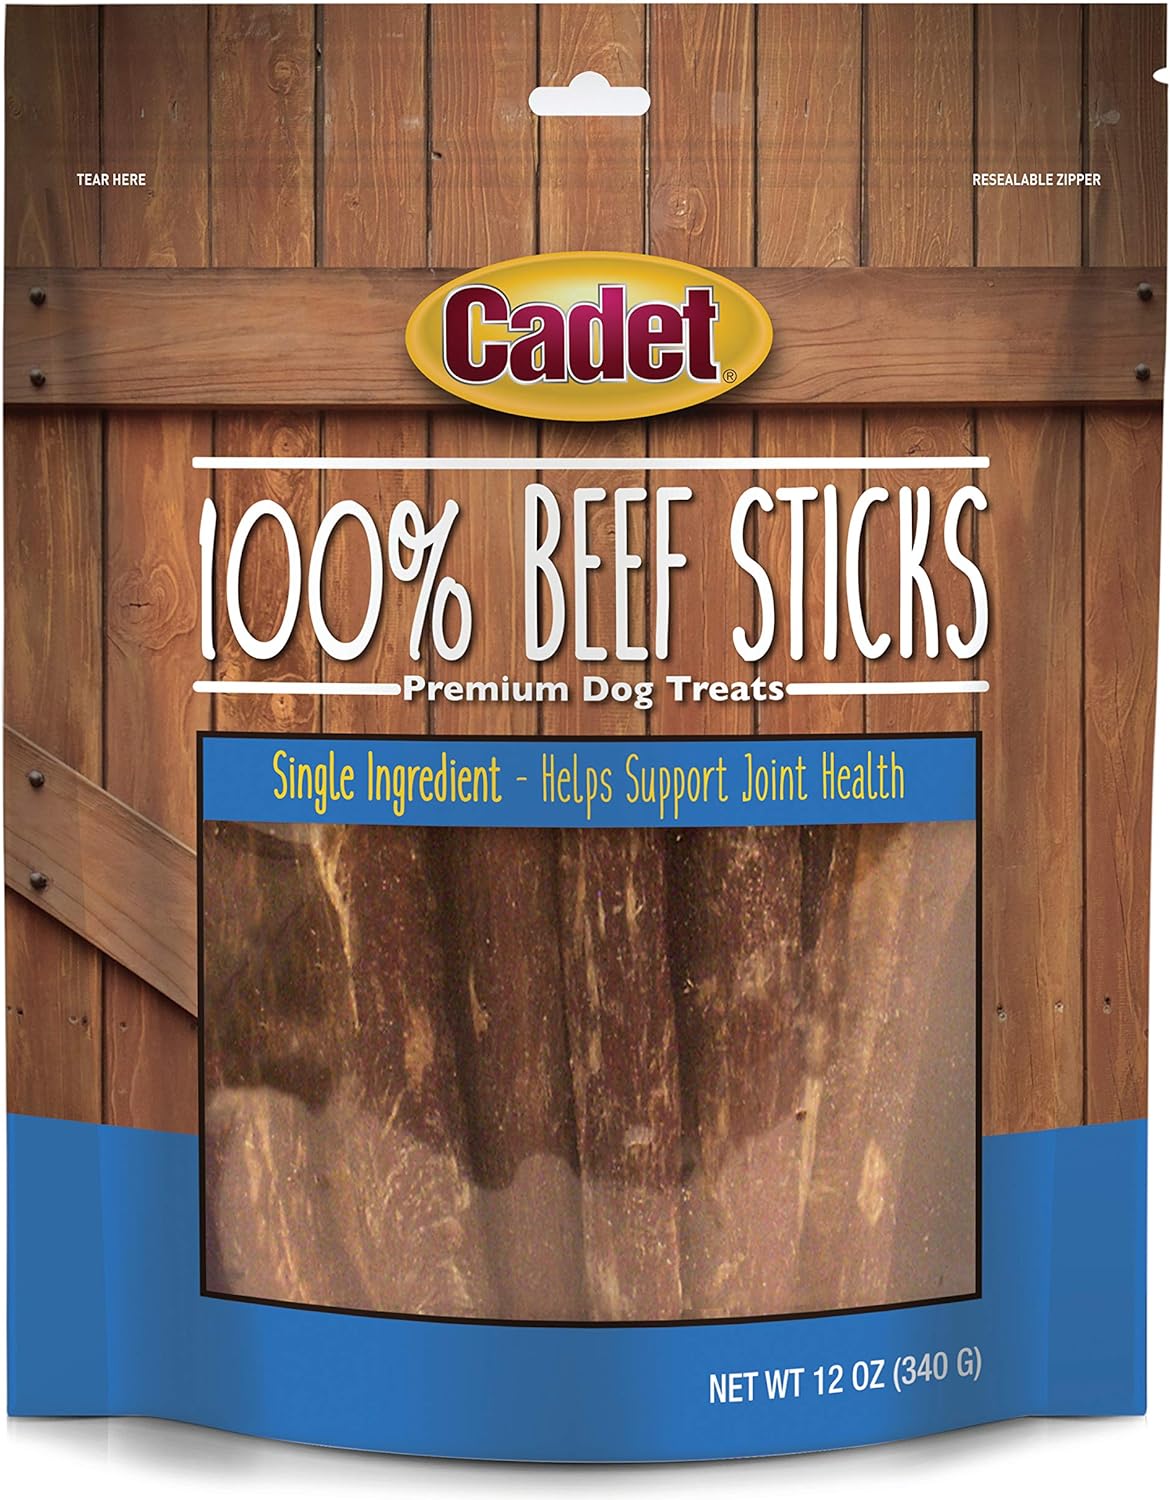 Cadet Beef Sticks Dog Treats - Long-Lasting, Healthy & Natural Beef Esophagus Treats for Small & Large Dogs, Low Calorie & High Protein Dog Chews (12 oz.)